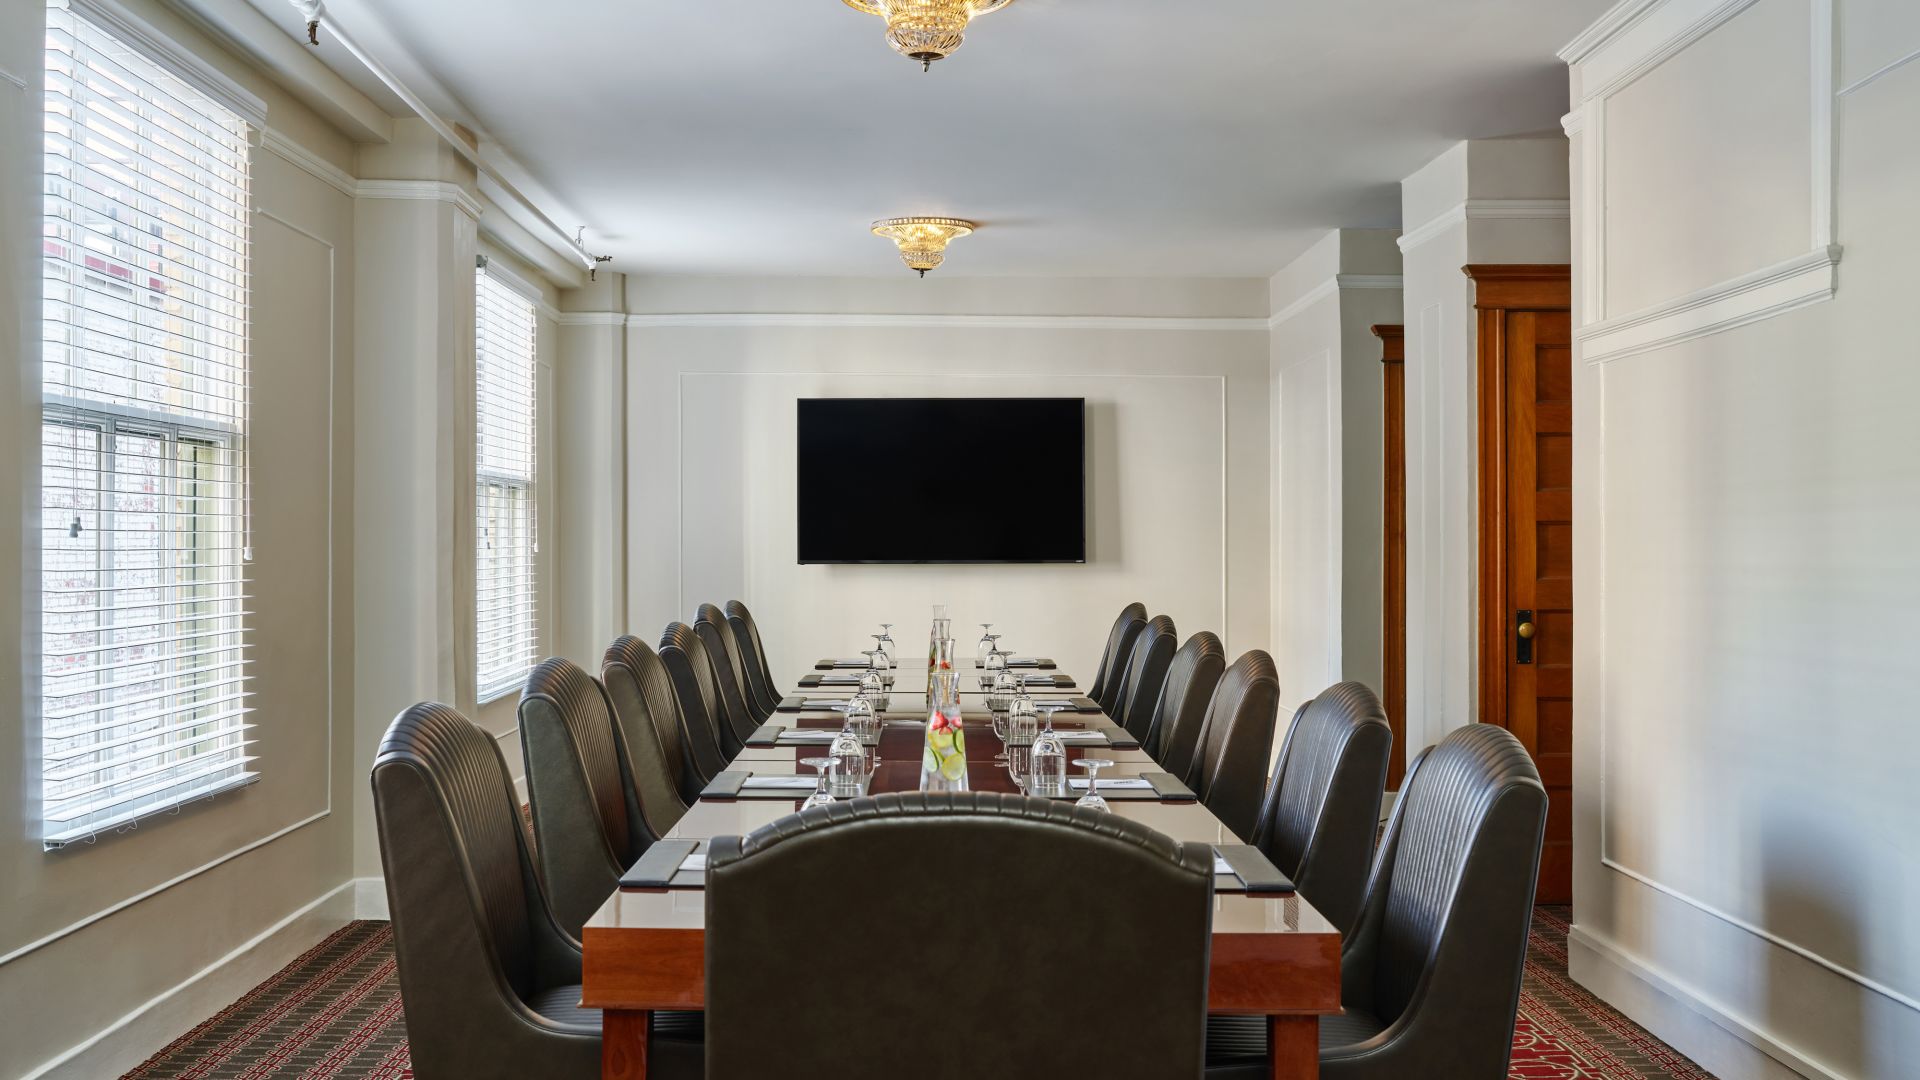 Hamilton Meeting Room at The Oxford Hotel - Long Board Room Table with Plush Leather Conference Chairs